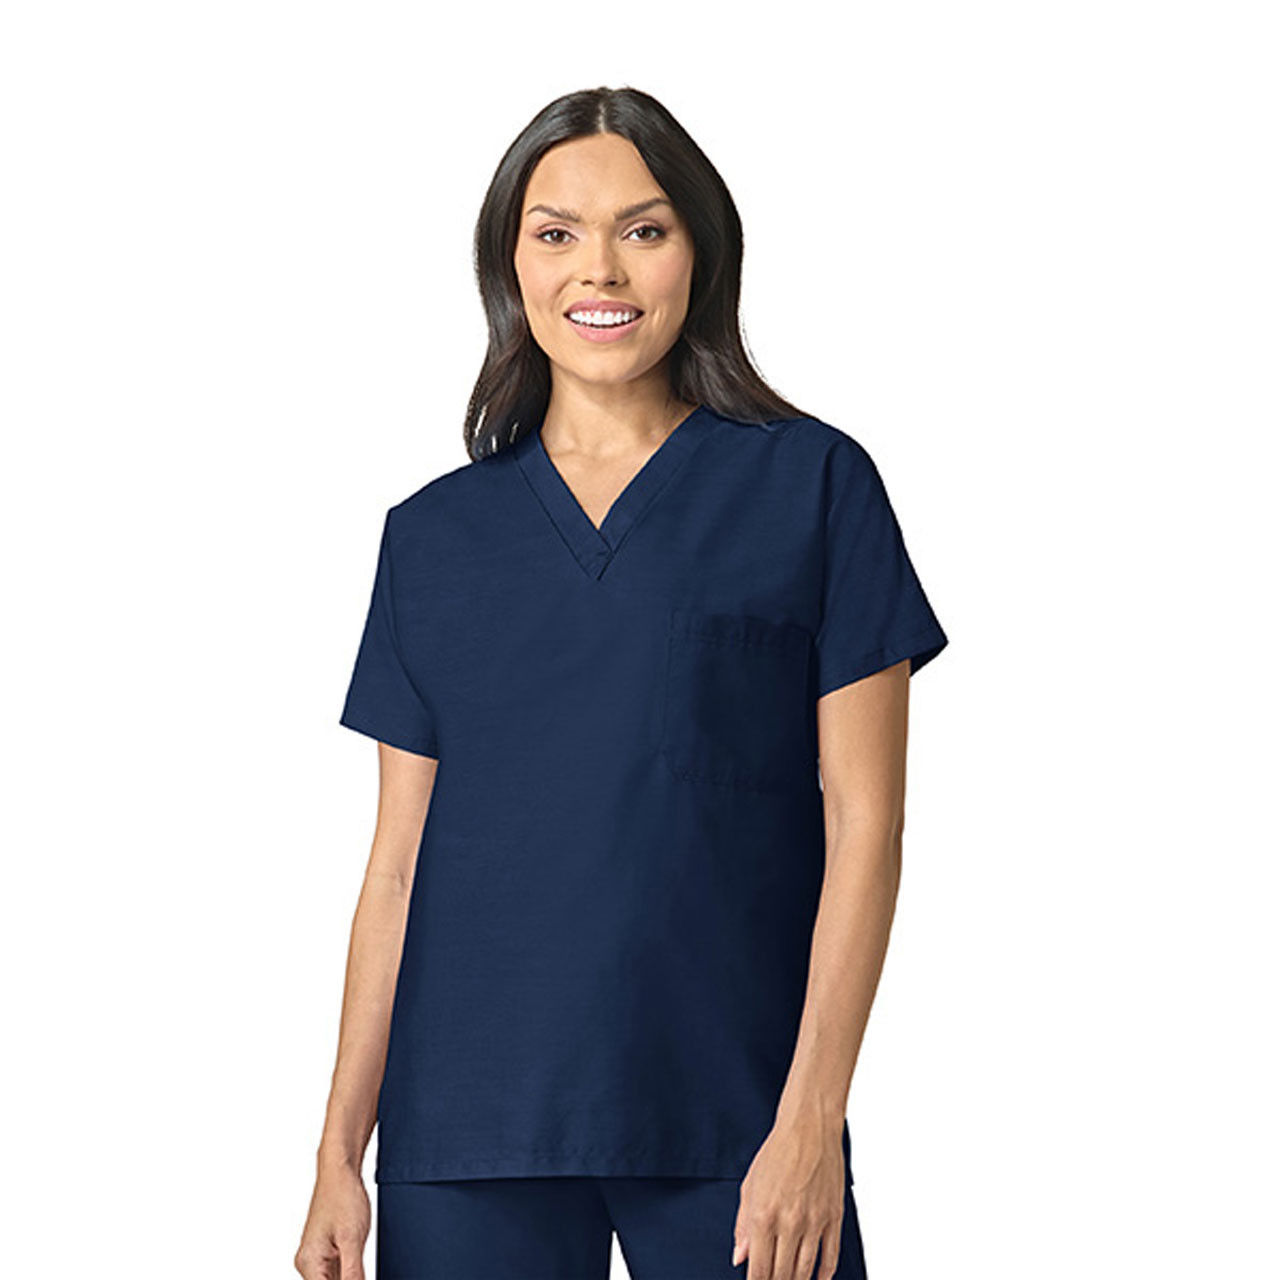 What is the material composition of the V Neck Scrub Top?